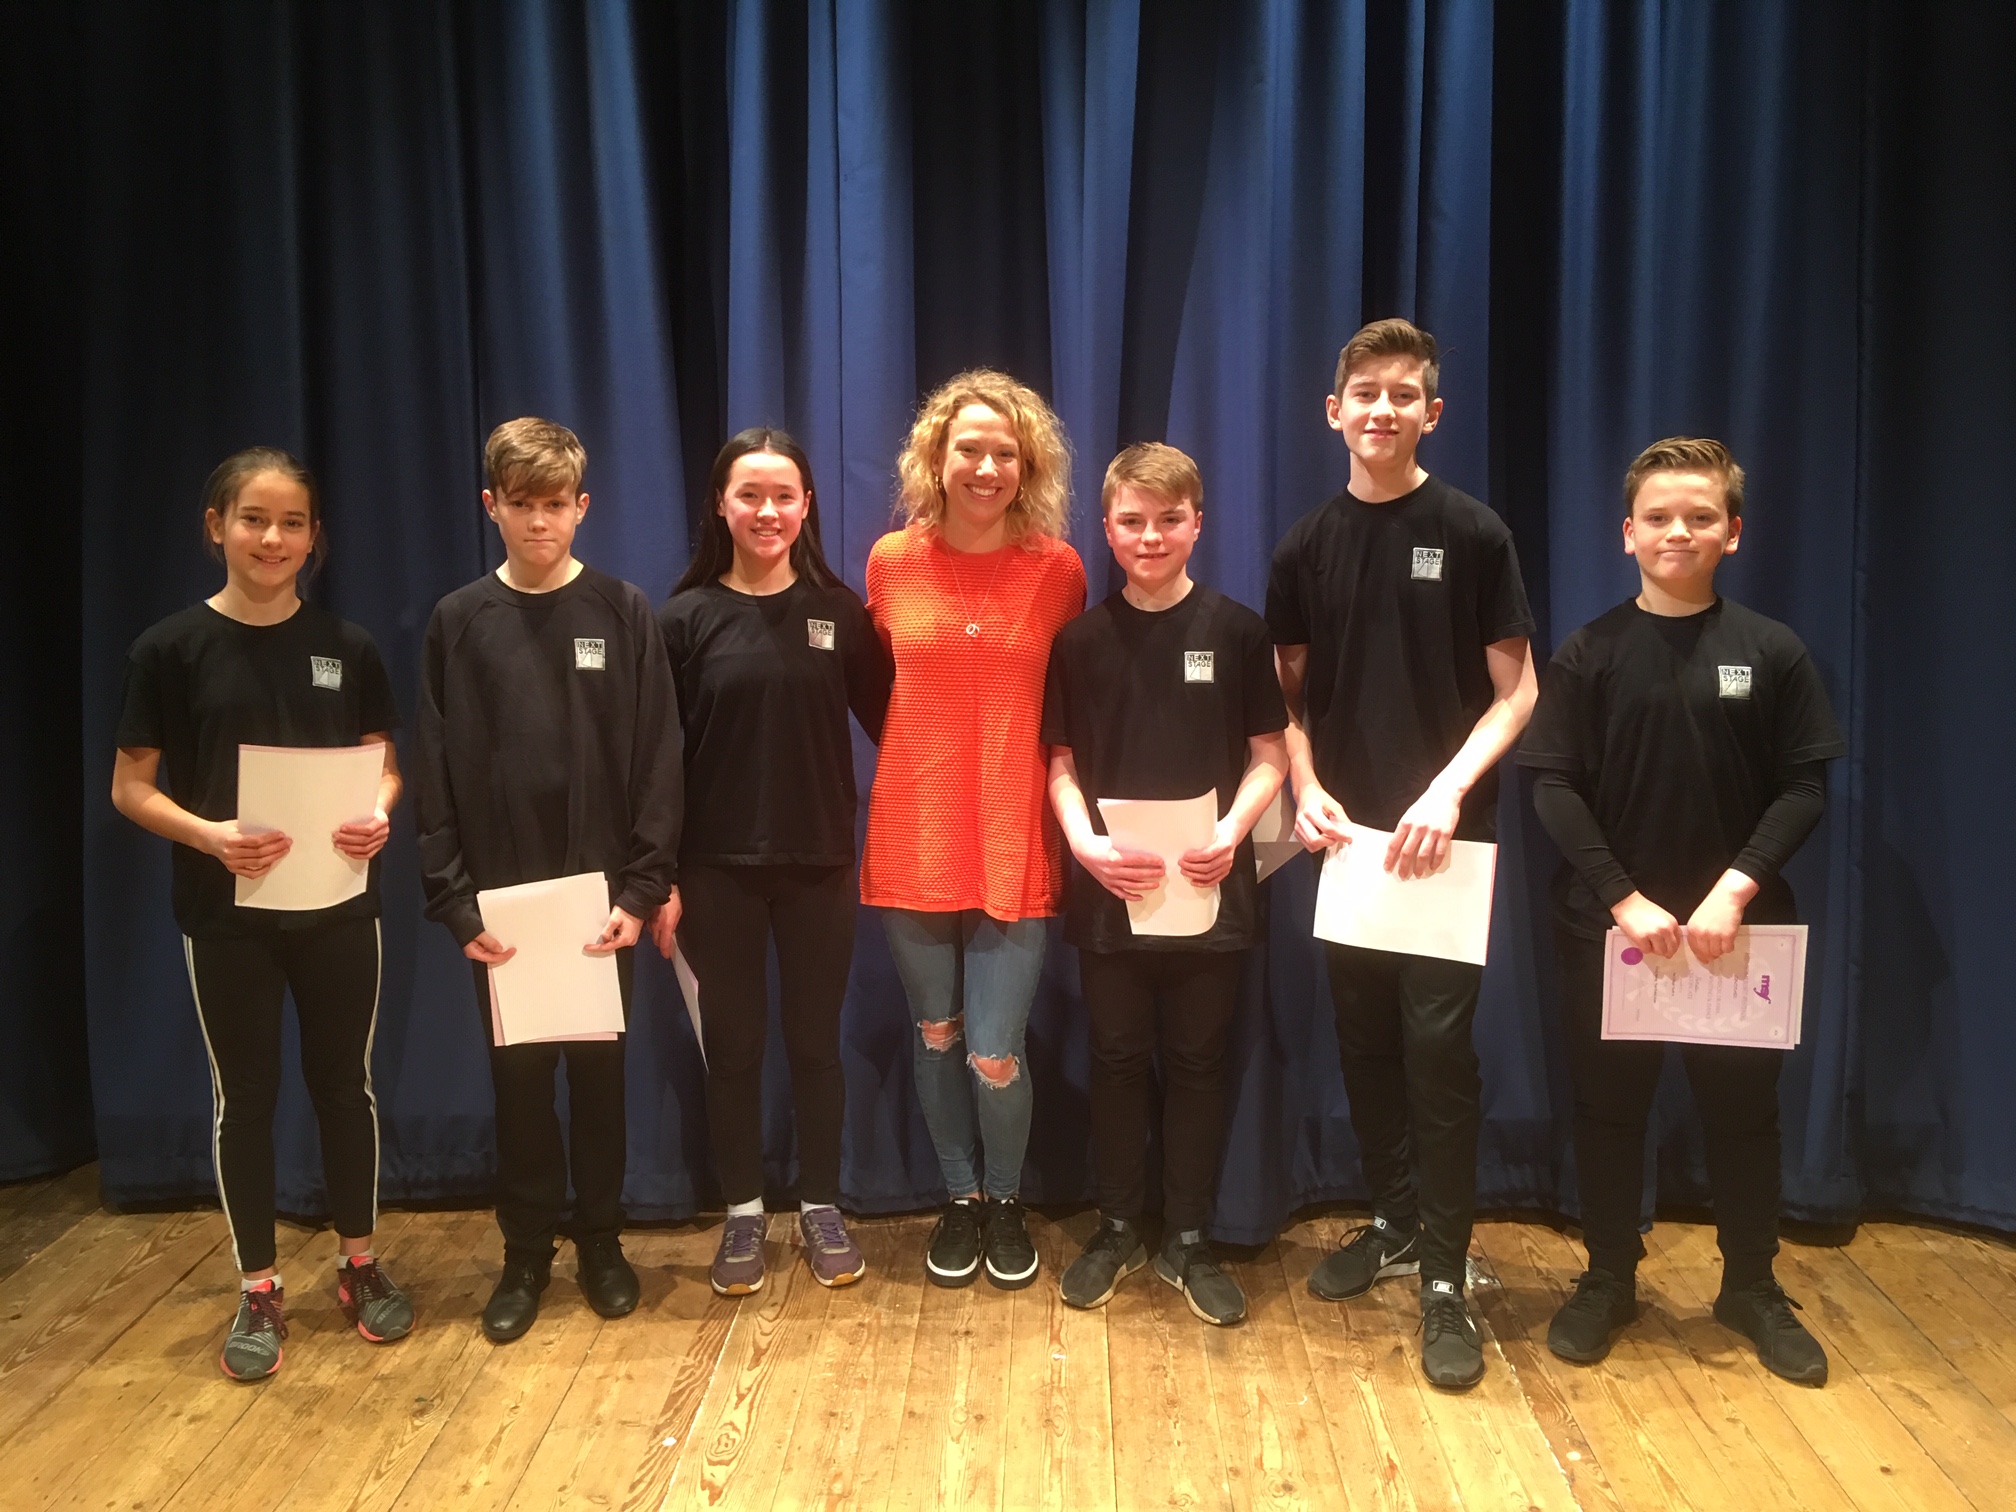 Second Place Juniors: Next Stage Youth Group A - Eleanor Lewis, Tom Pegler, Eve Howard, Harry Lewis, Freddie Stockton, Finlay Gilmour with NSY Tutor Georgi Bassil